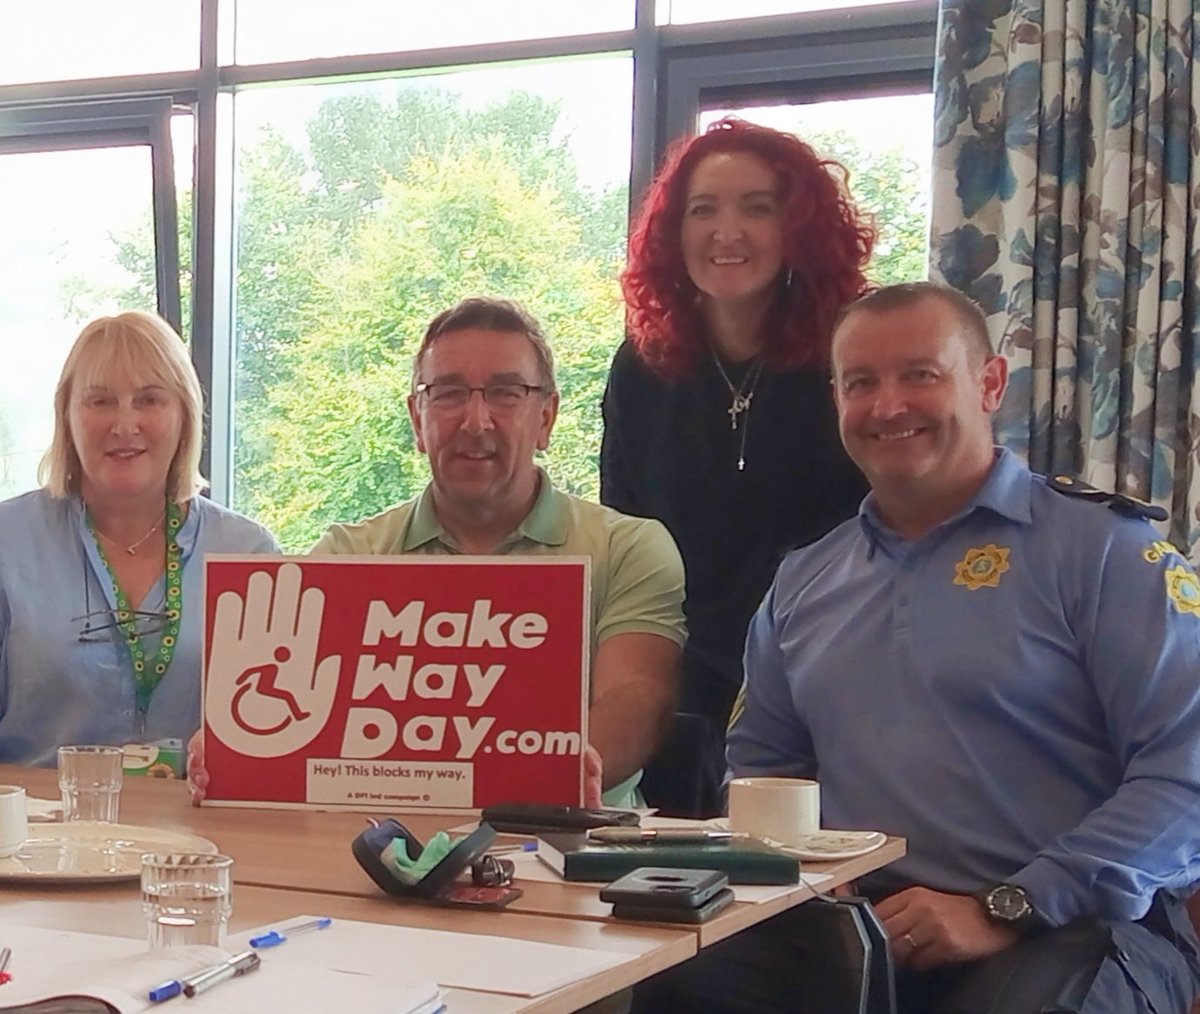 MAKE WAY DAY - 22nd SEPT The #kilkenny Access Group had a prep event sharing info about #MakeWayDay It was brilliant to have Sergeant John Duffy, Head of Community @gardainfo & @SeamusNugent7 of @KilkennySport with us & supporting the initiative throughout #MakeWayDay23